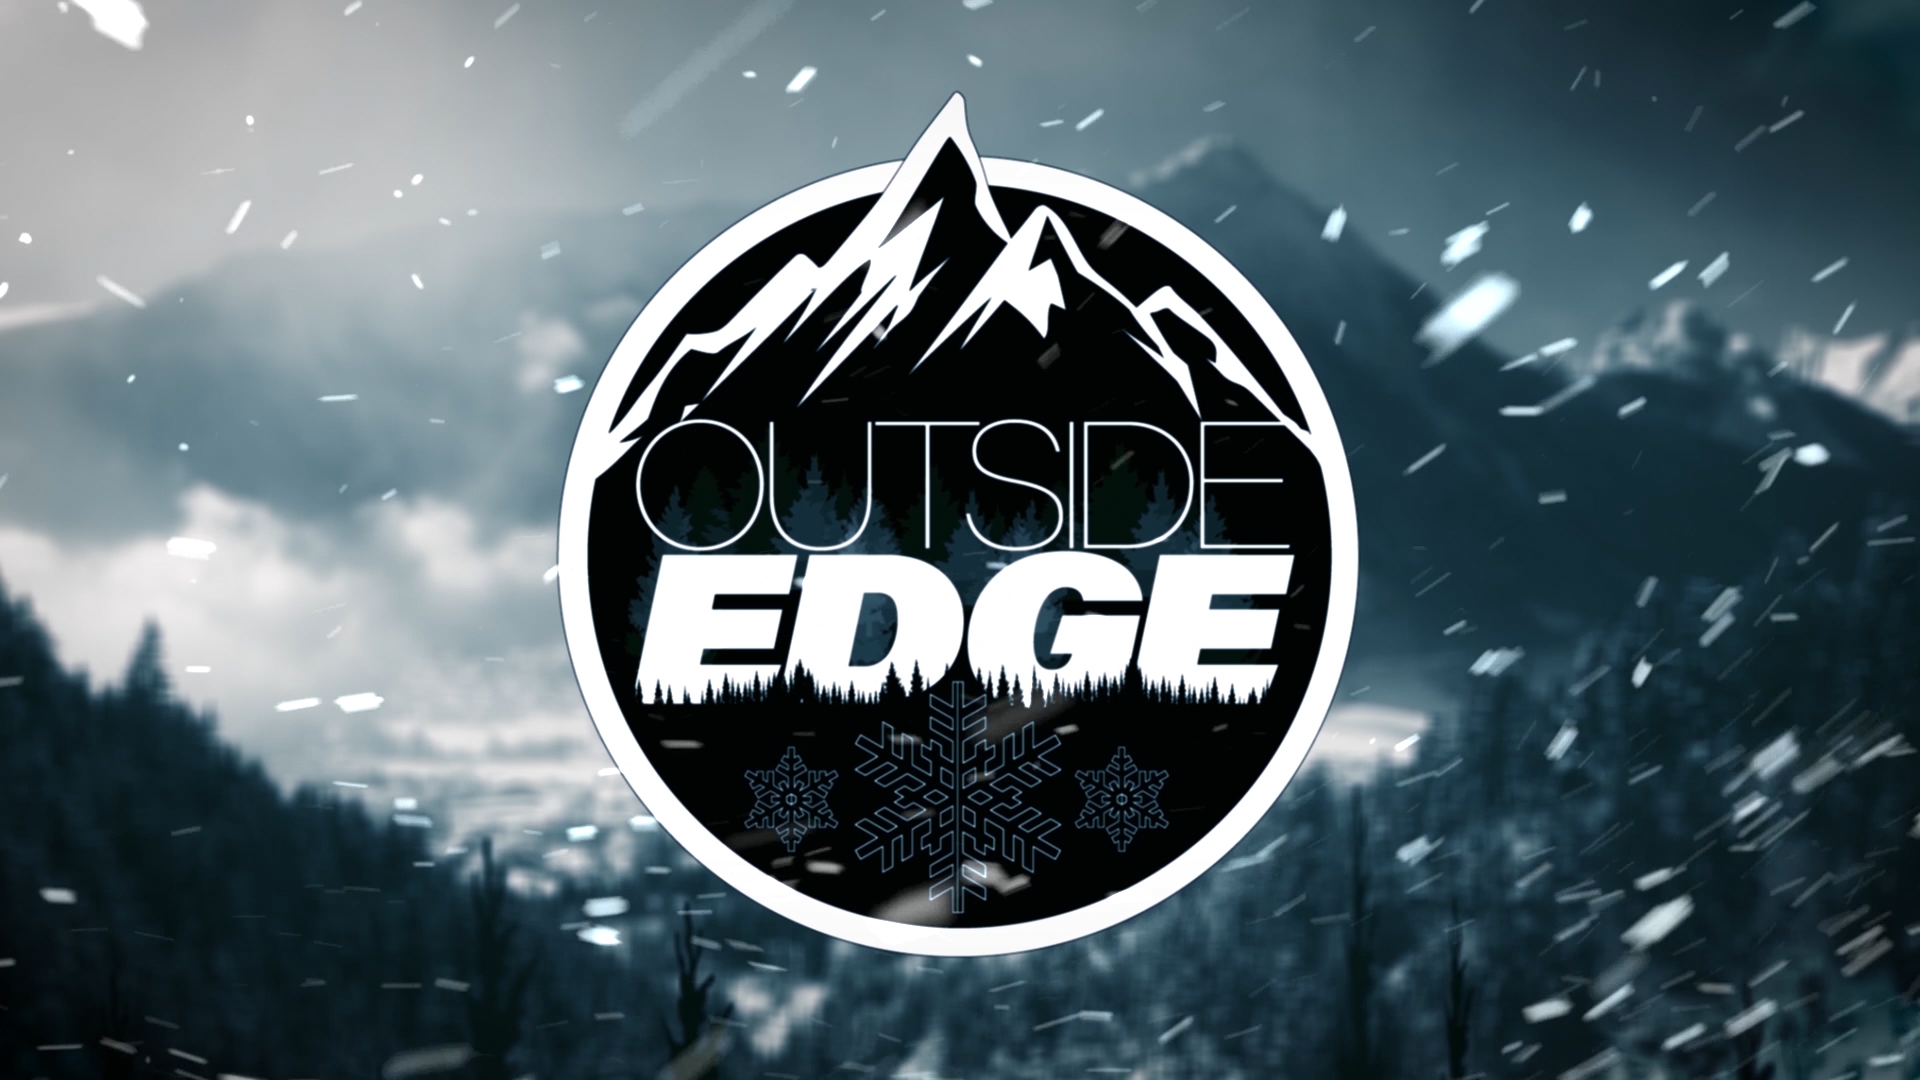 OUTSIDE EDGE | Getting out to the slopes to ring in 2021